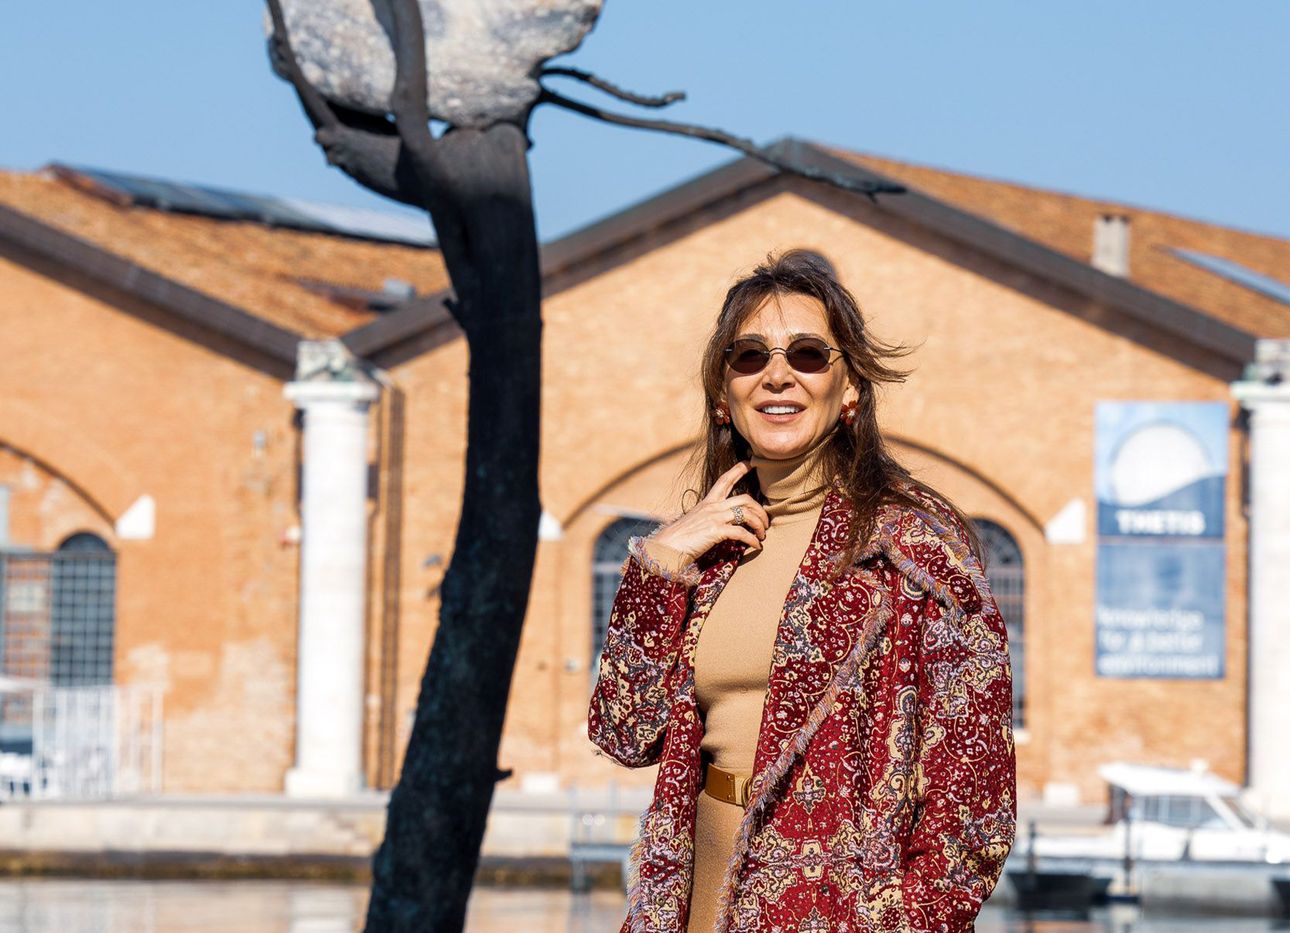 Vuslat Doğan Sabancı in front of artist Giuseppe Penone’s sculpture “Idee di Pietra–Olmo,” commissioned by the Vuslat Foundation for the 2021 Venice Architecture Biennale. (Photo: Enrico Fiorese)